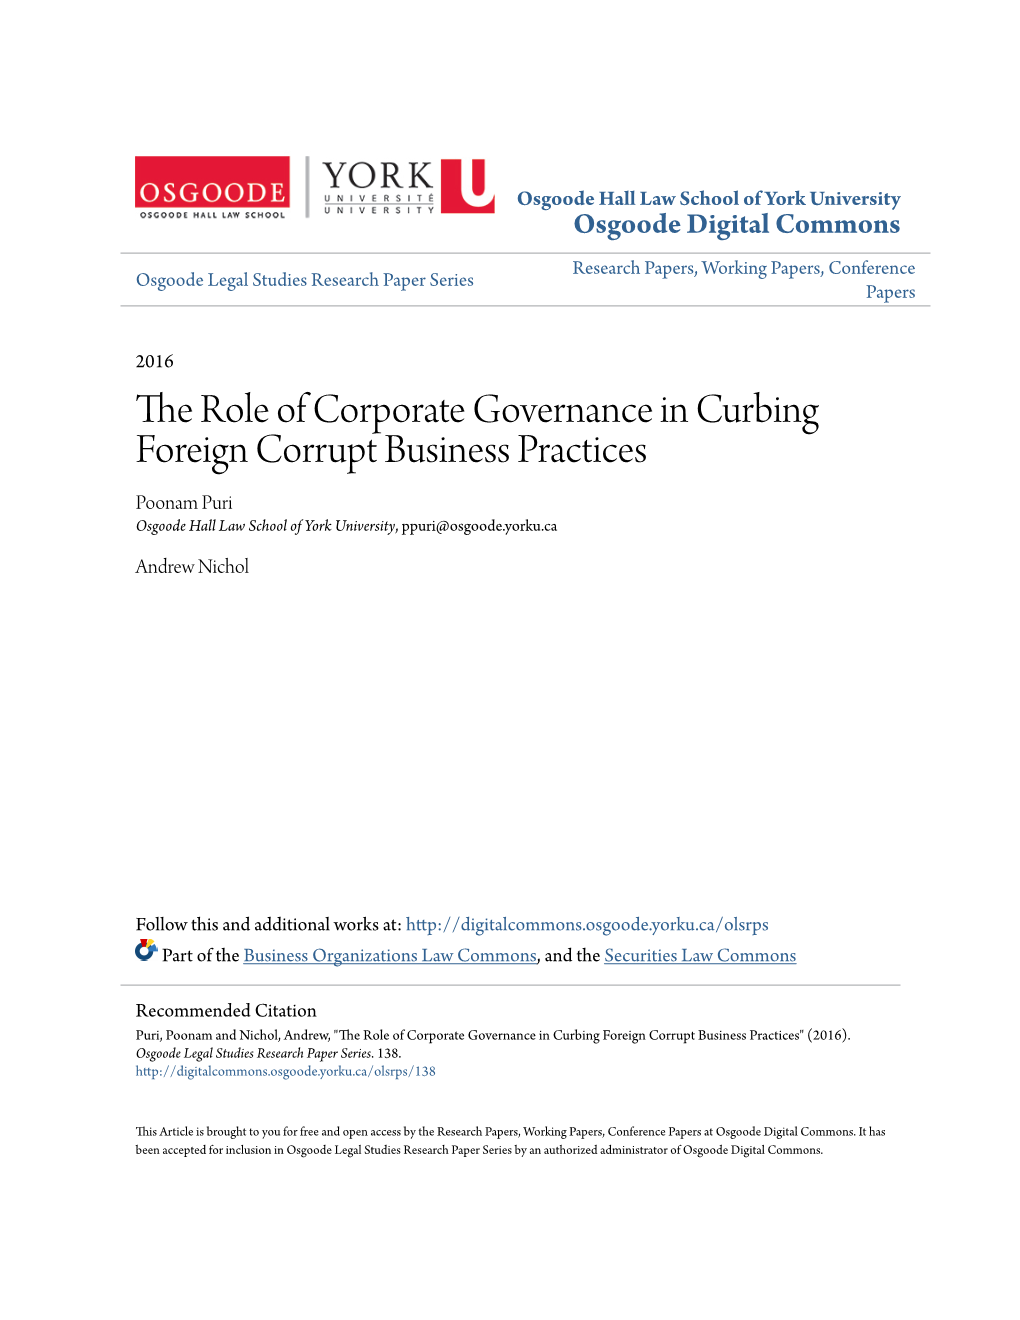 The Role of Corporate Governance in Curbing Foreign Corrupt Business Practices Poonam Puri Osgoode Hall Law School of York University, Ppuri@Osgoode.Yorku.Ca